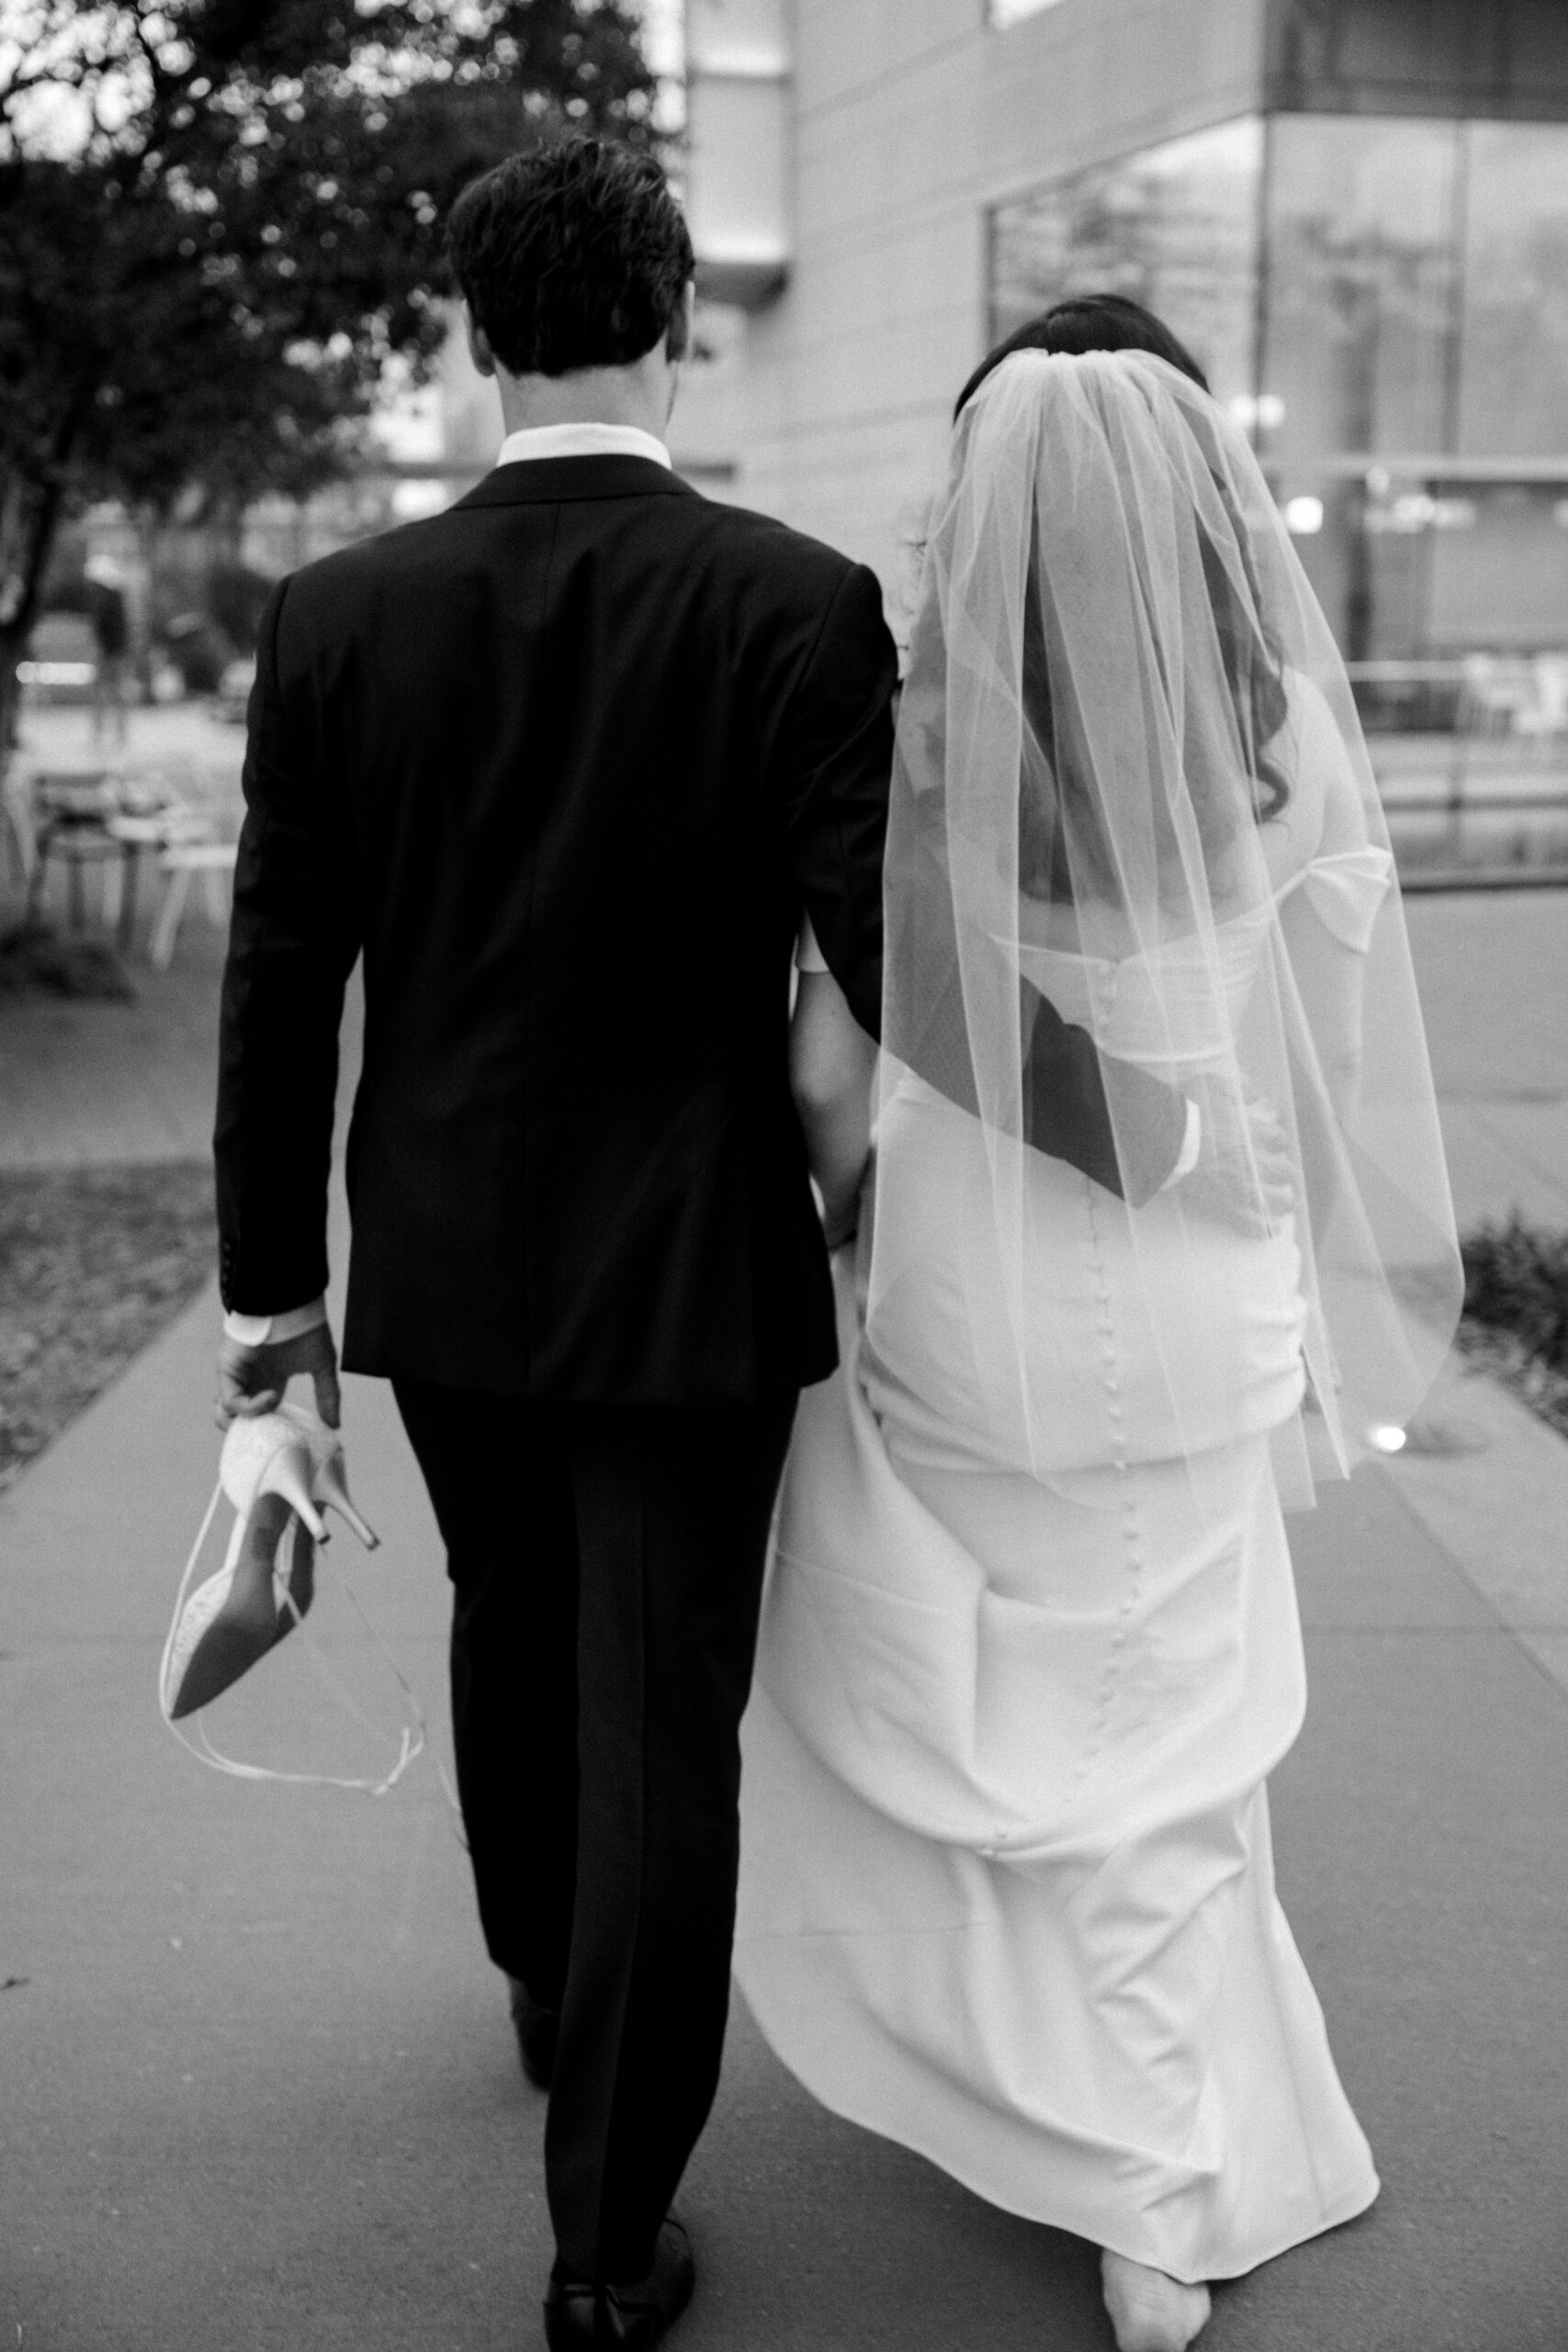 Black and white full body image of bride and groom walking away from camera, groom has one hand on bride's back and with his other hand is carrying her shoes